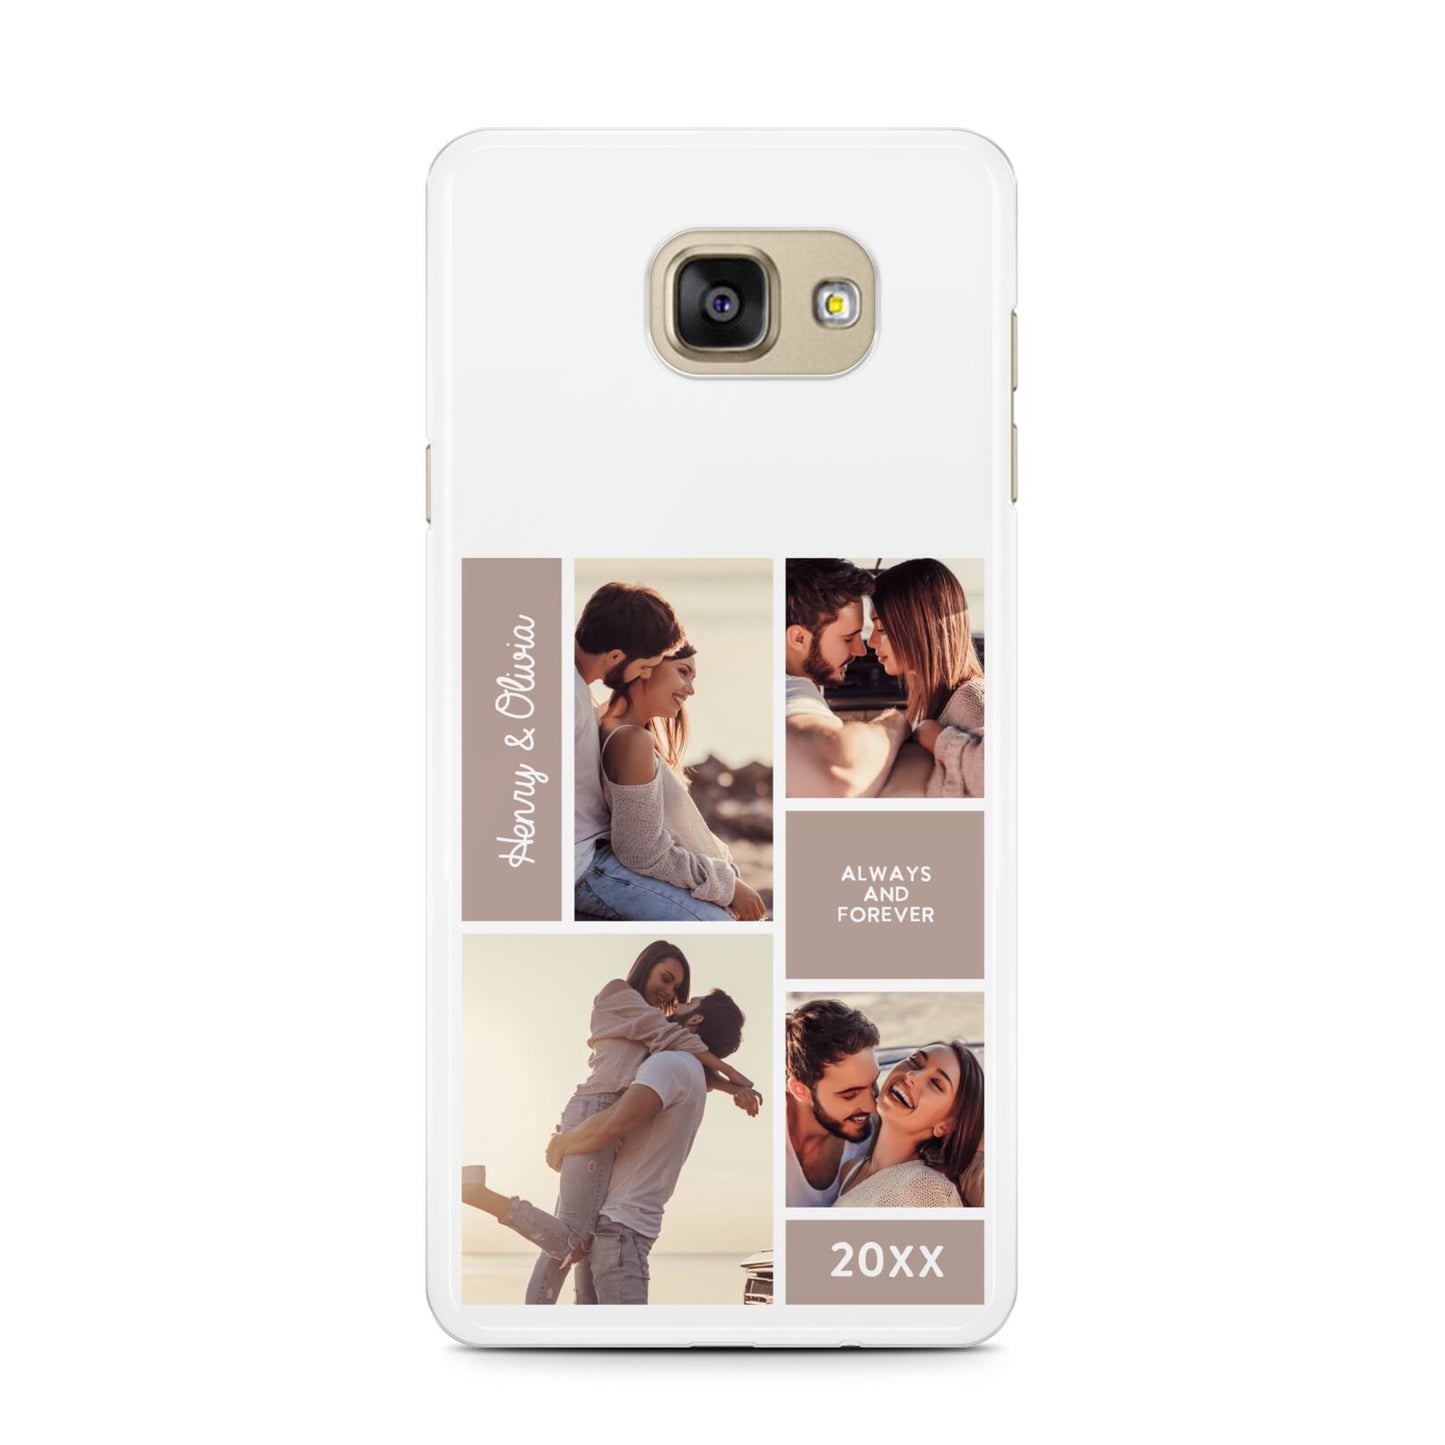 Couples Valentine Photo Collage Personalised Samsung Galaxy A7 2016 Case on gold phone